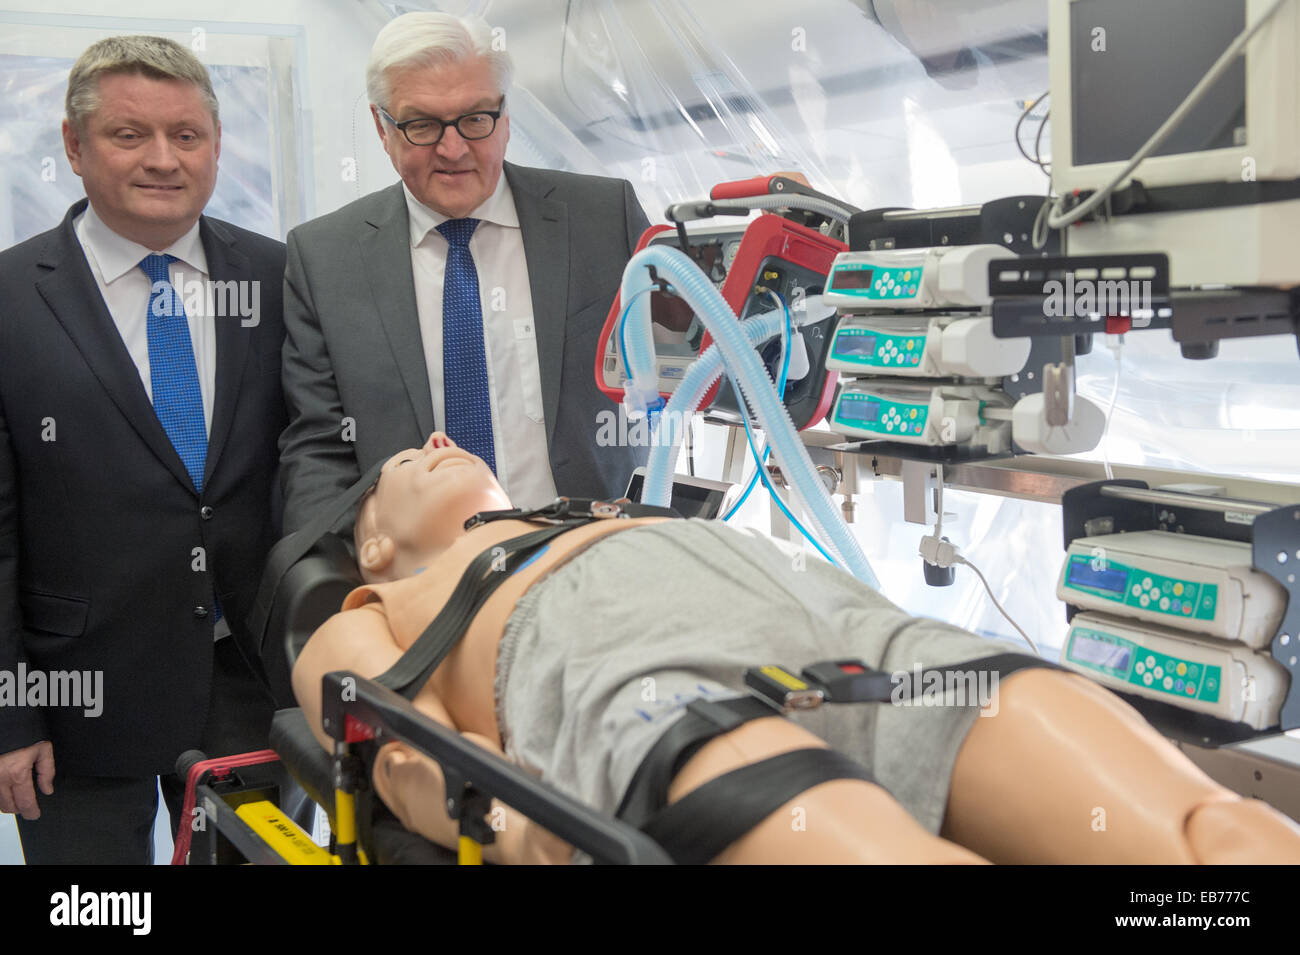 Berlin, Germany. 27th Nov, 2014. German Foreign Minister Frank-Walter Steinmeier (R) and Health Minister Hermann Groehe tour the 'Robert Koch' evacuation plane at Tegel Airport in Berlin, Germany, 27 November 2014. The Airbus A340 has an isolation unit for highly infectious patients with for example ebola. Photo: MAURIZIO GAMBARINI/dpa/Alamy Live News Stock Photo